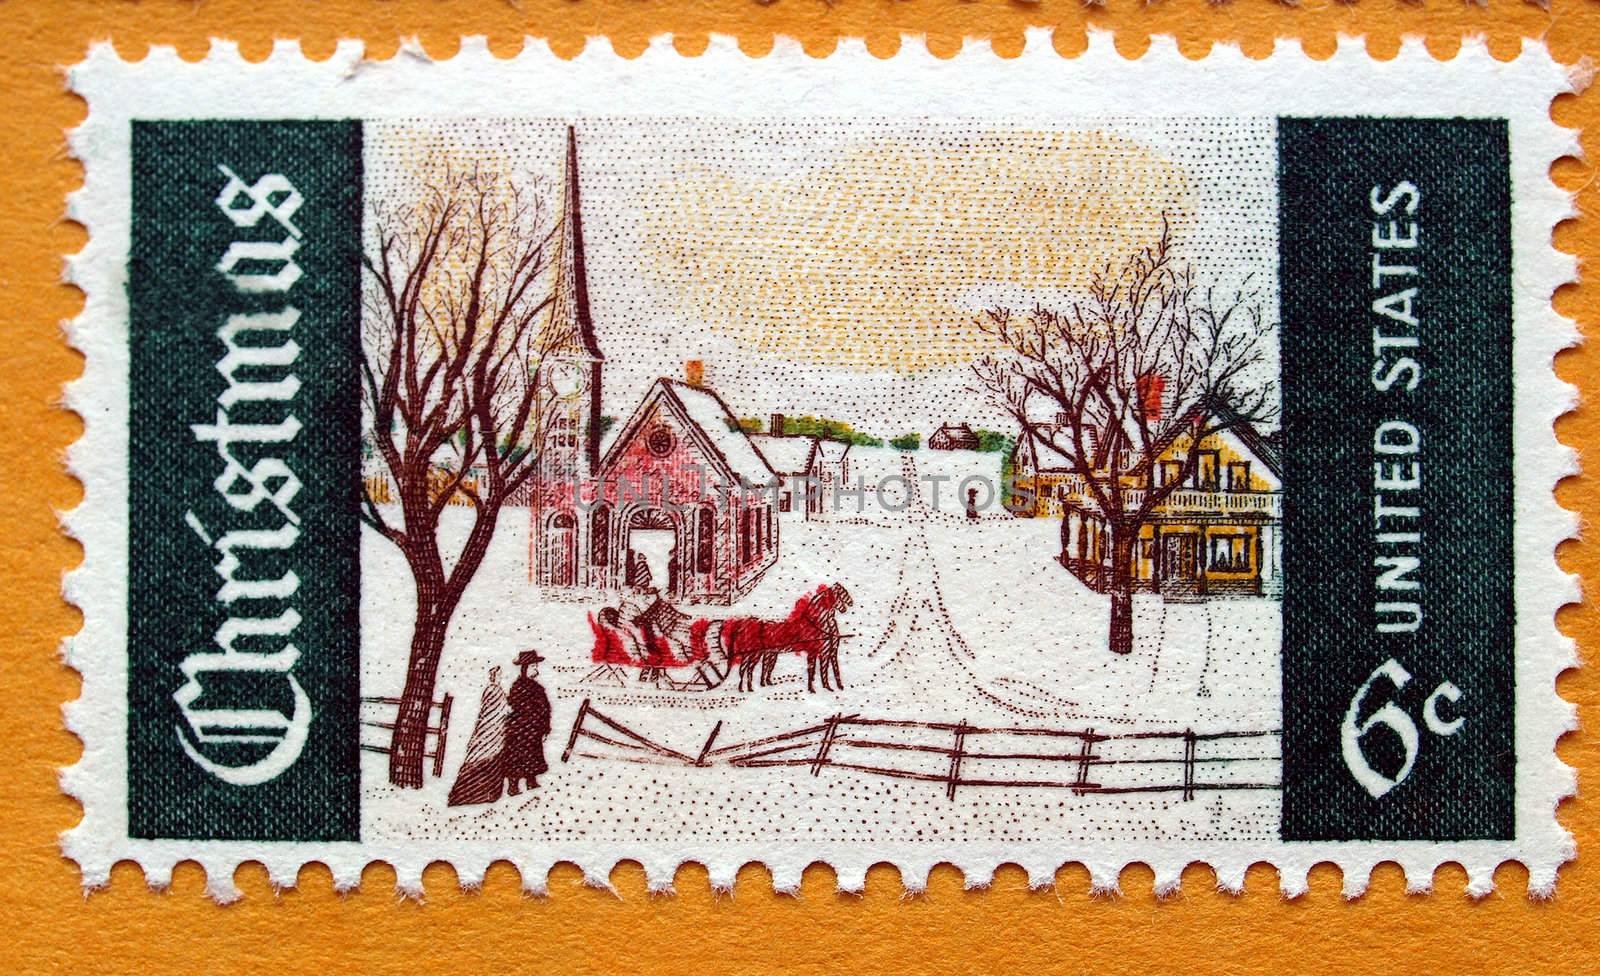 US Christmas stamp by paolo77